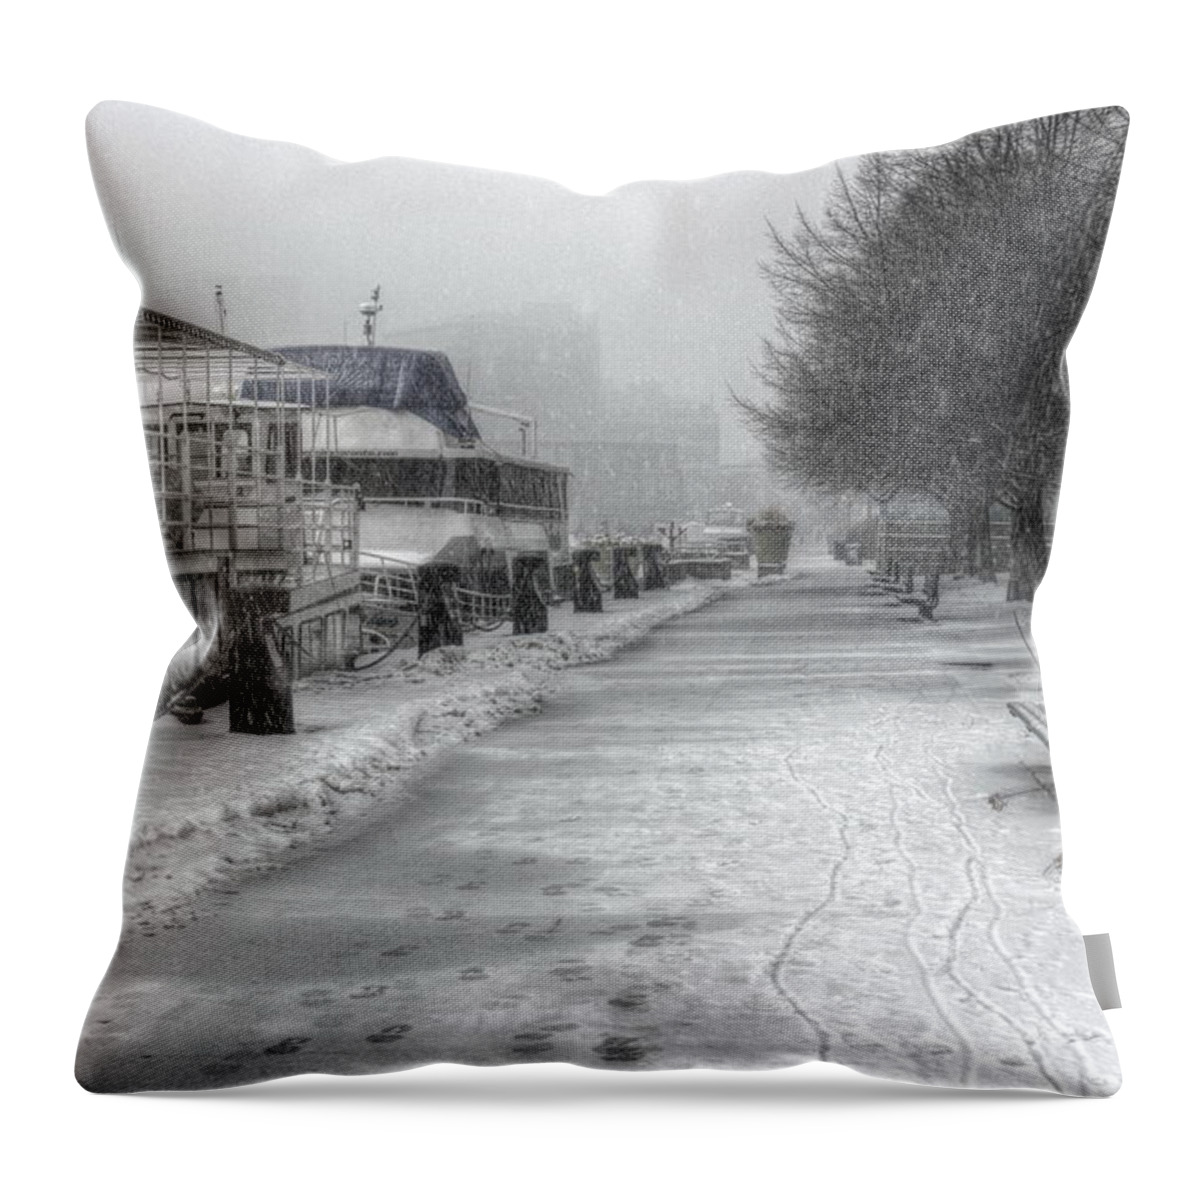 Alone Throw Pillow featuring the photograph Winter Snow Storm II by Nicky Jameson